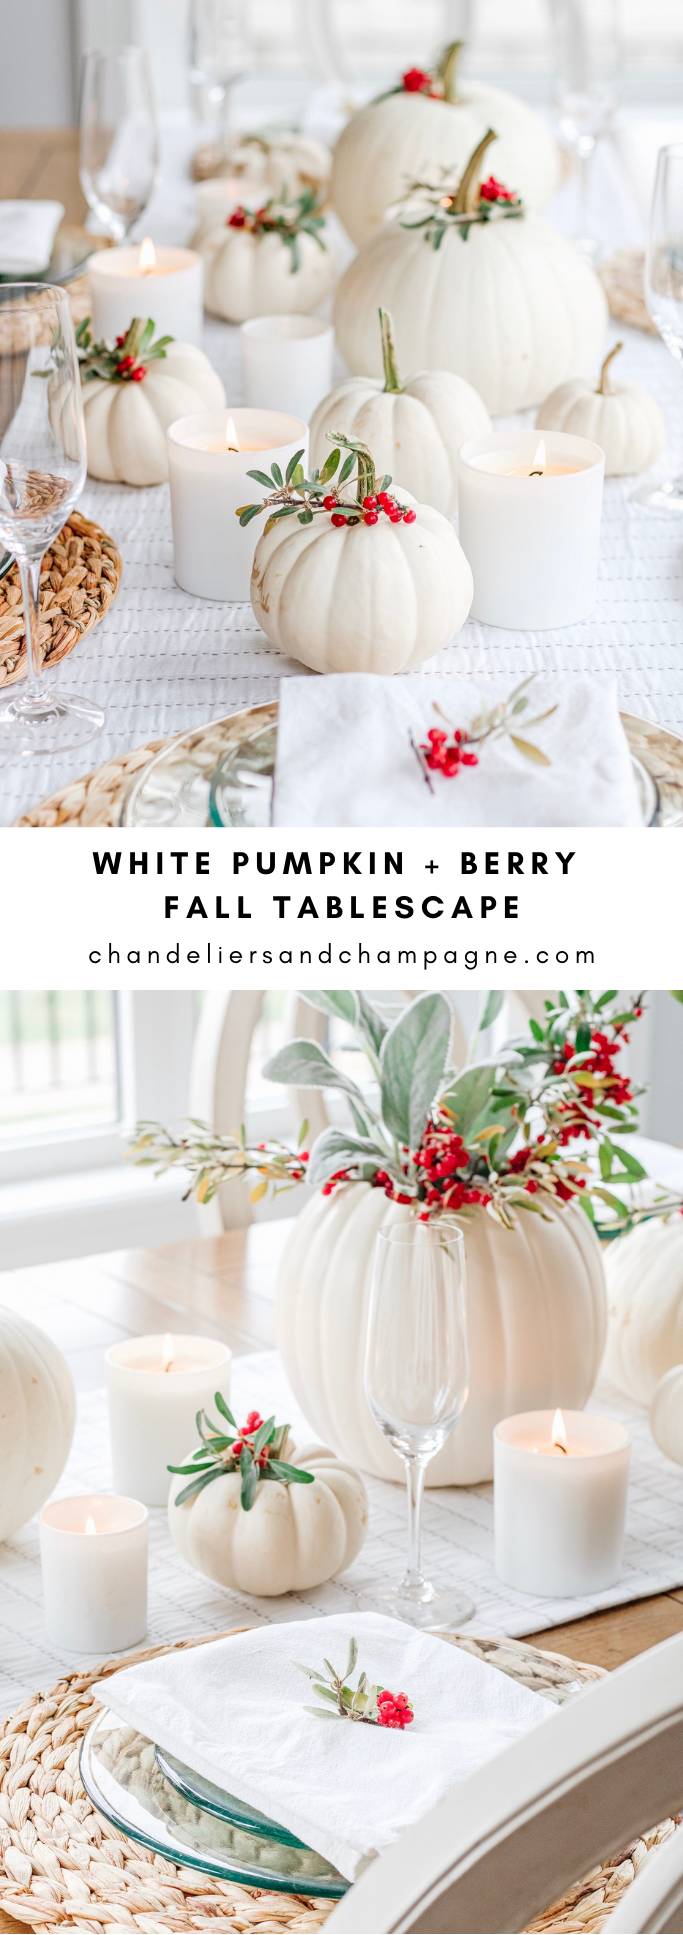 Whtie pumpkin and berry fall tablescape - red and white fall tablescape